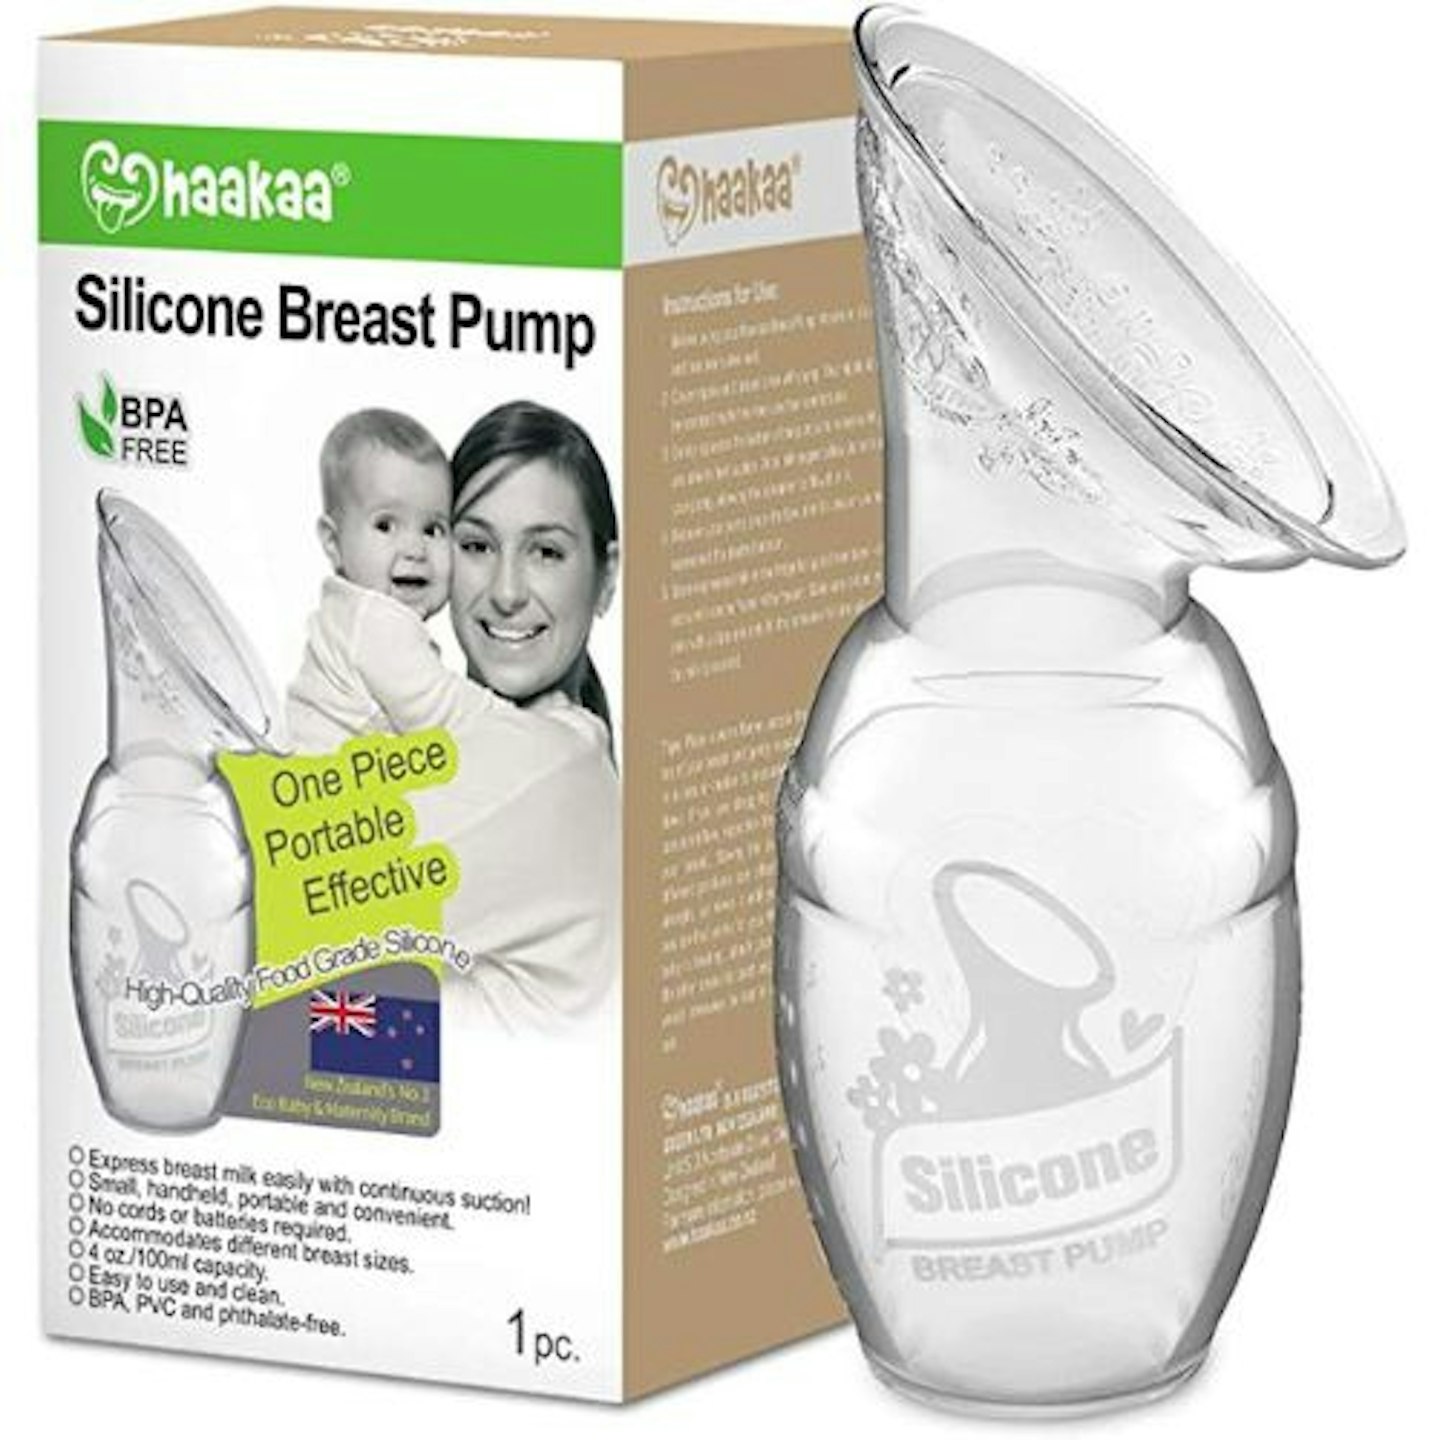 https://images.bauerhosting.com/celebrity/sites/3/2023/05/haakaa_Manual_Breast_Pump_Silicone_Breast_Pump.jpg?auto=format&w=1440&q=80